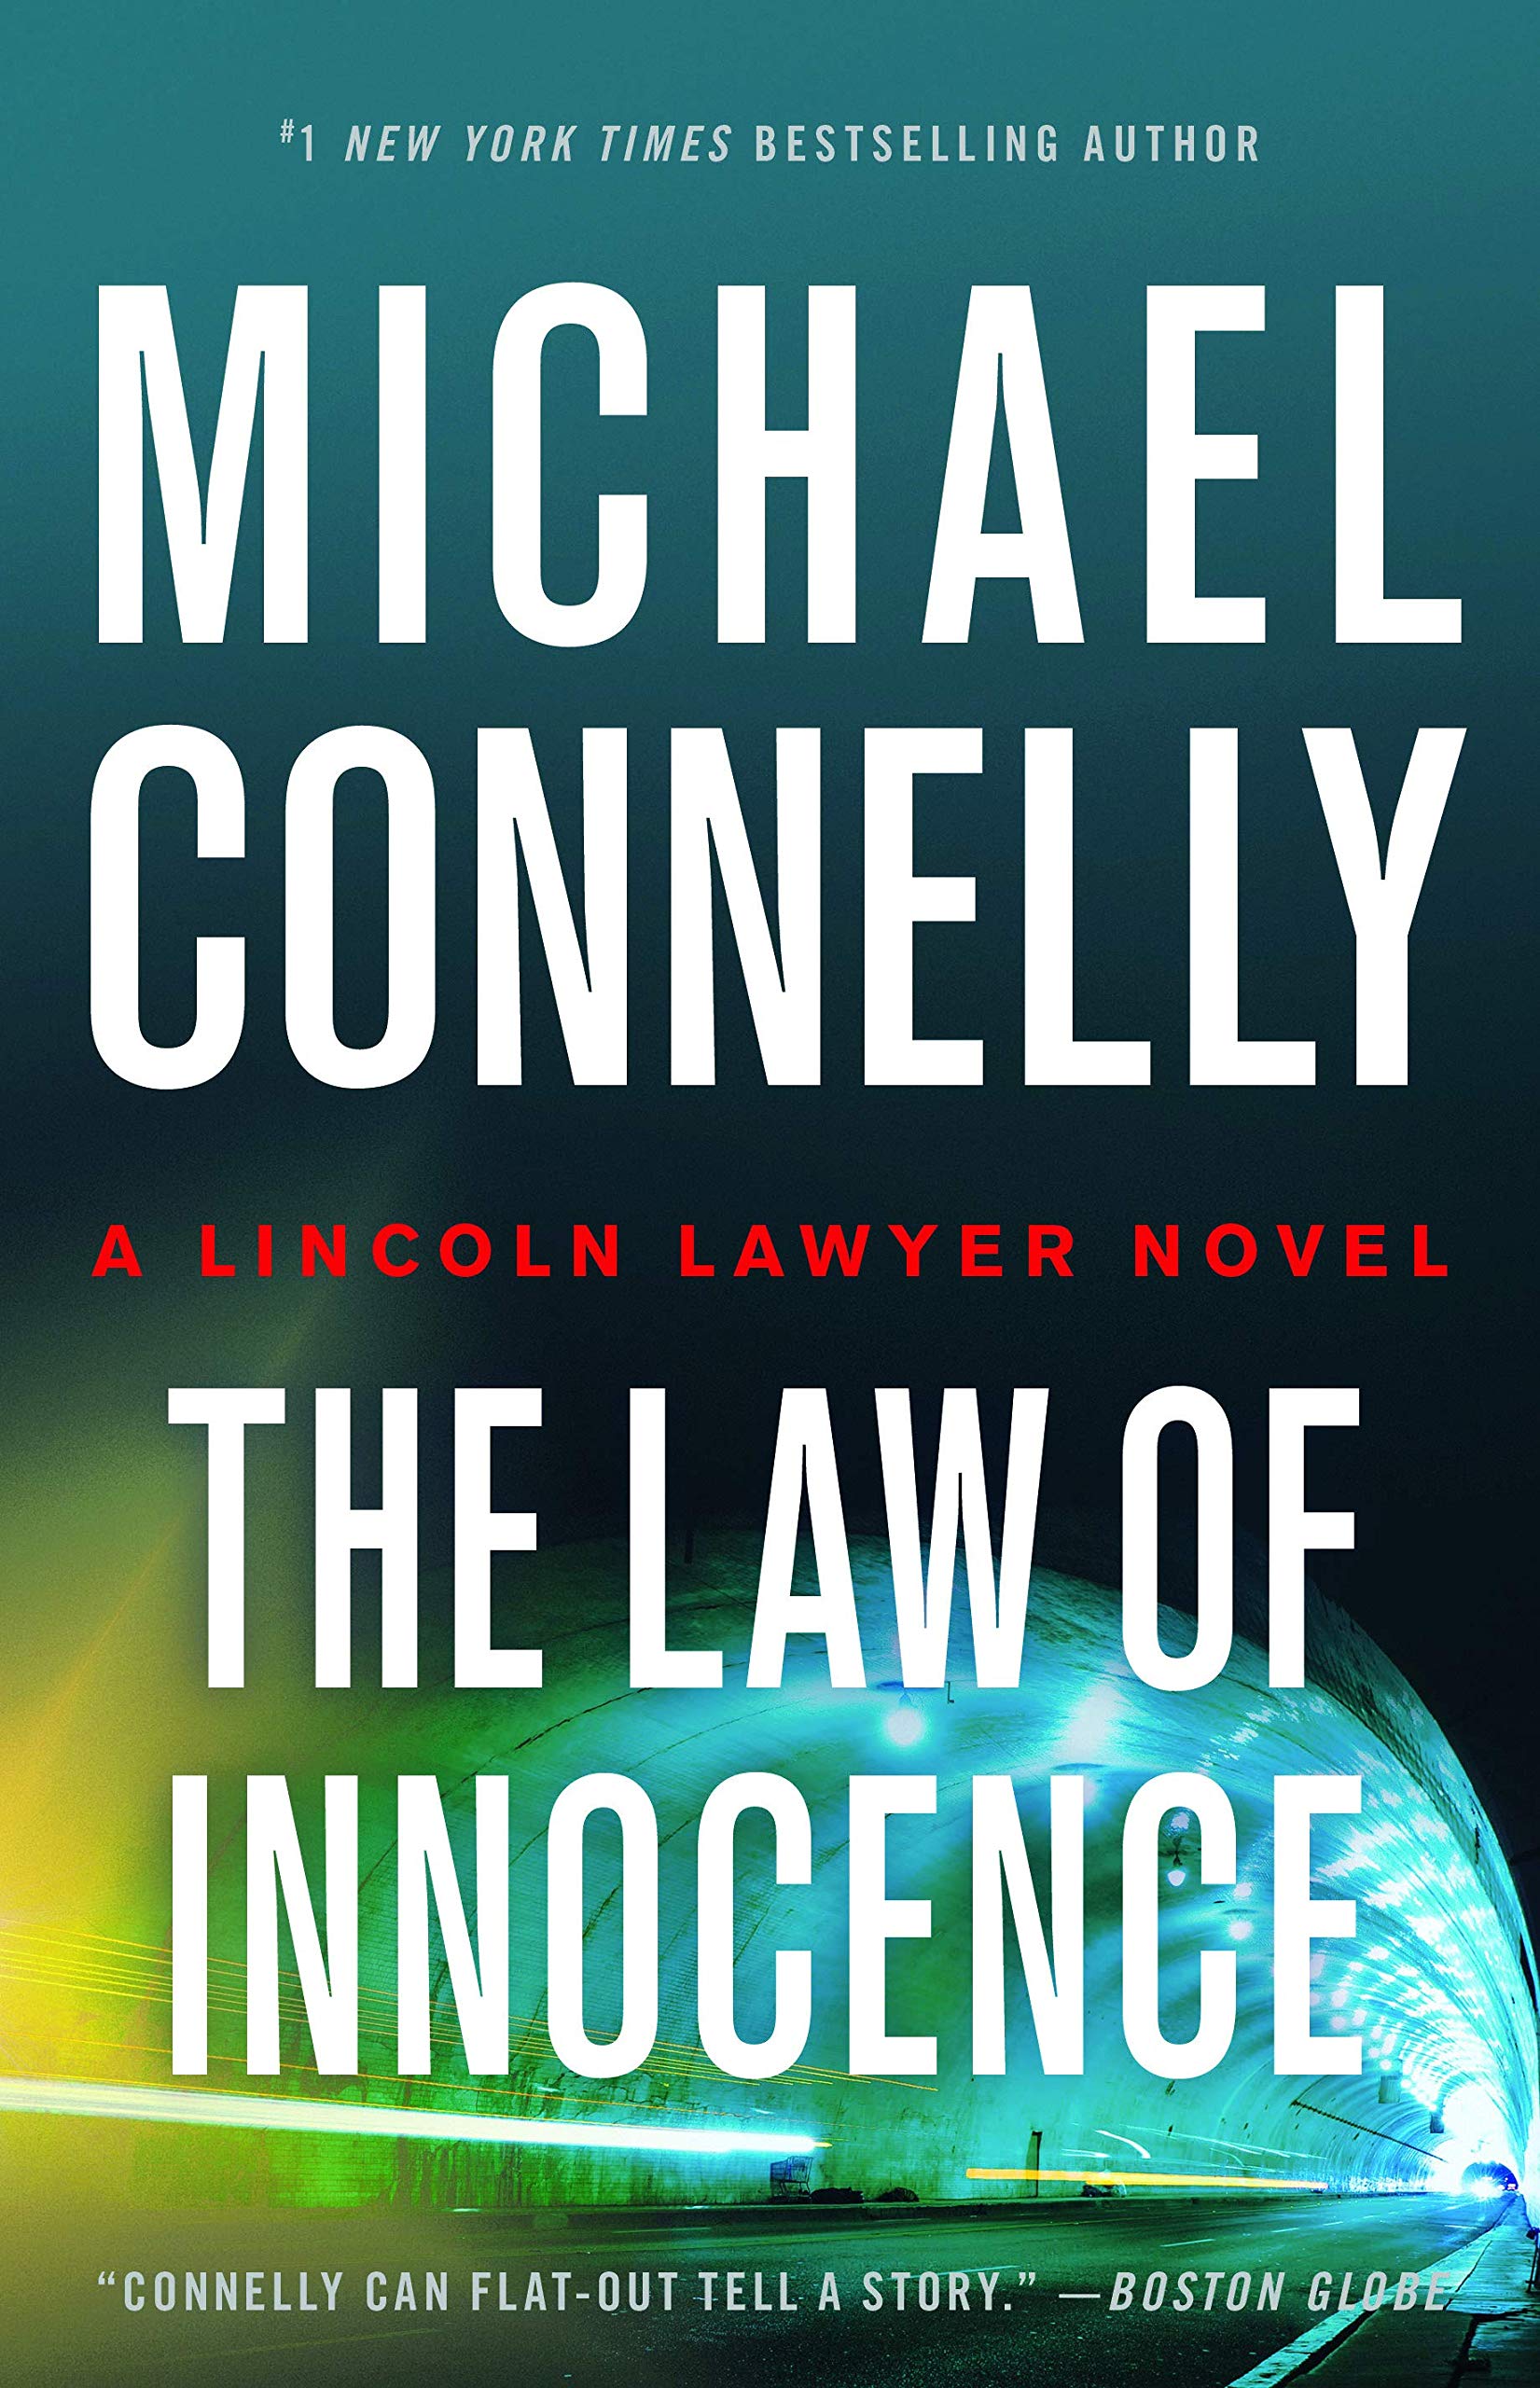 image for "The Law of Innocence"